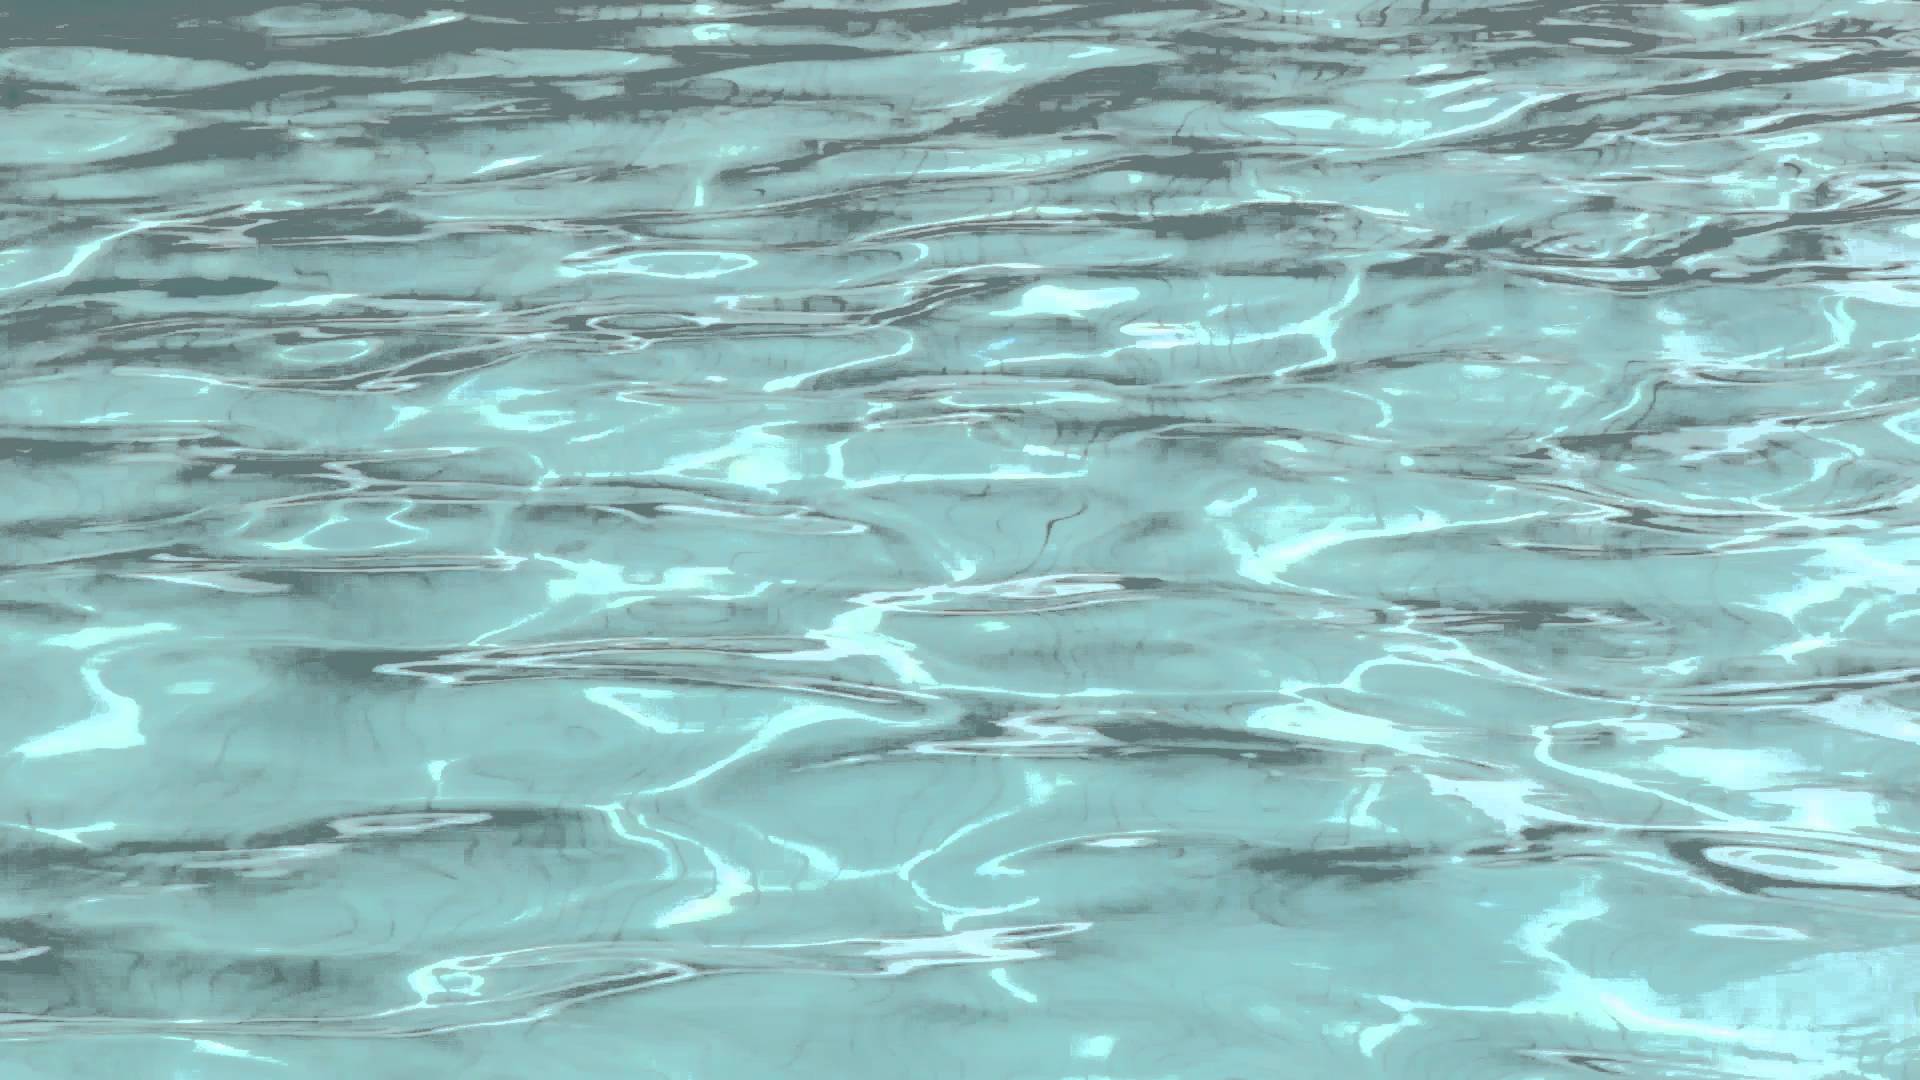 Water Ripples In Swimming Pool | Free Stock Footage - YouTube